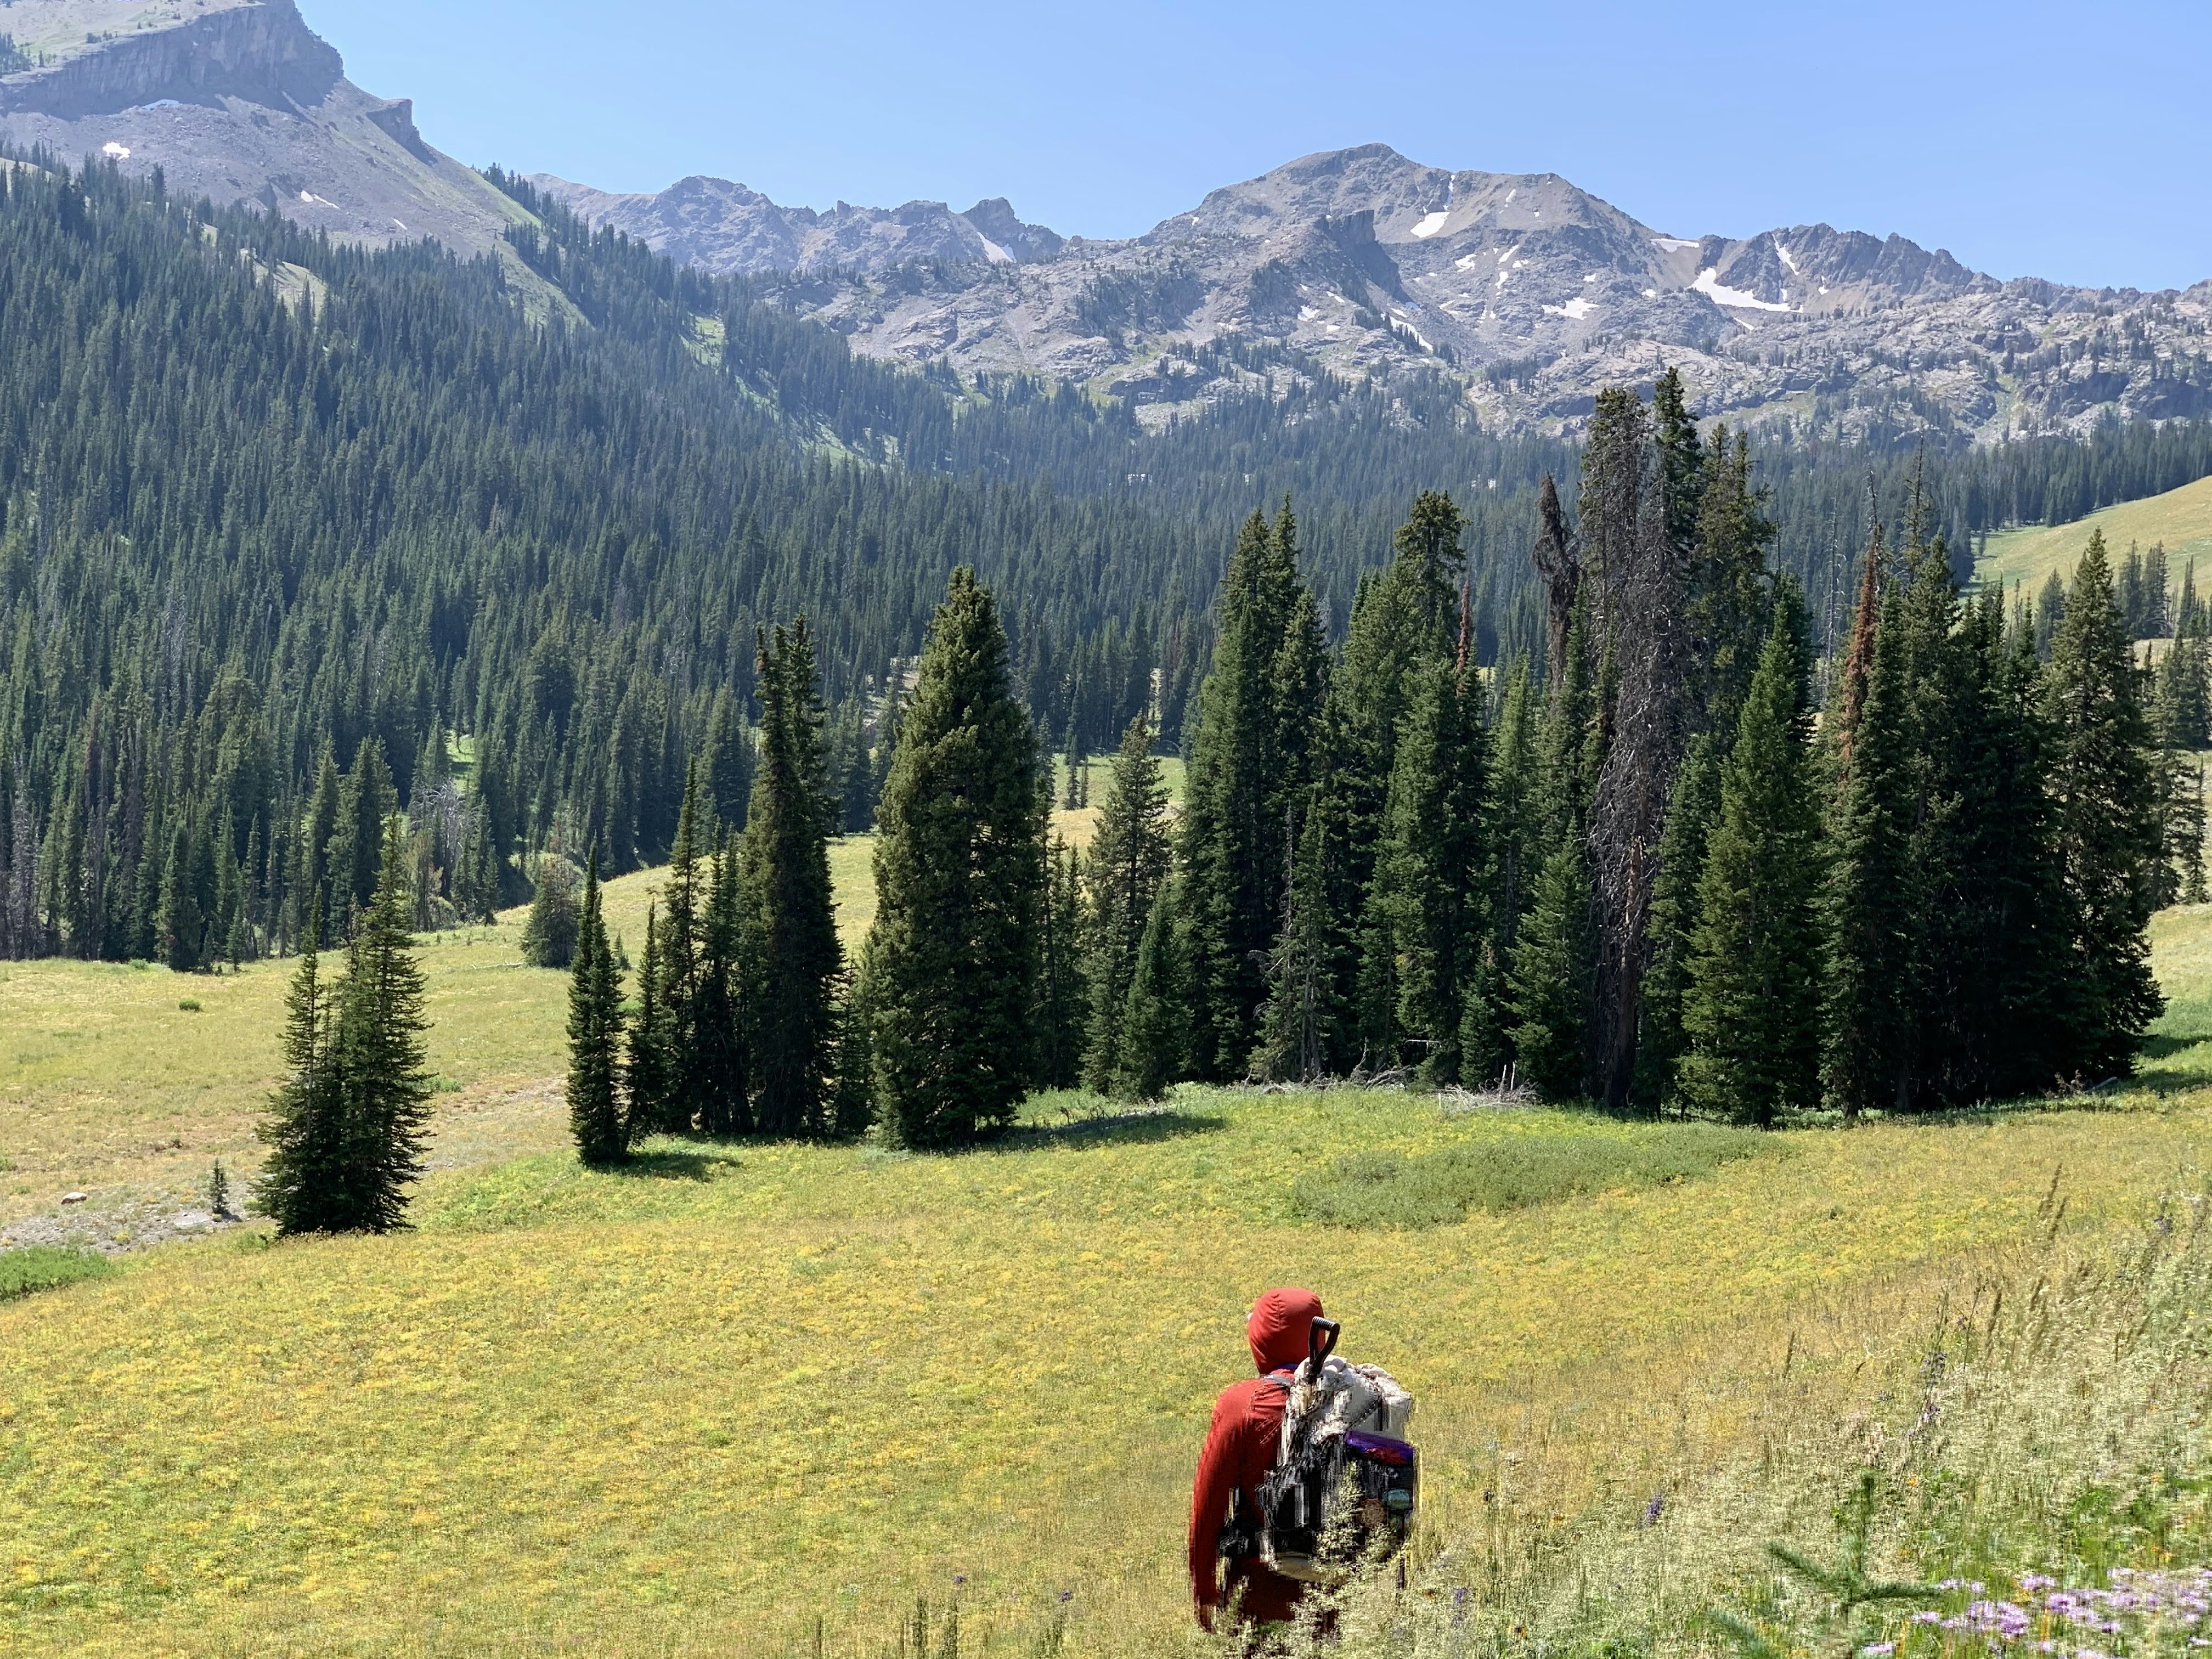 Hiker walking through a grass field with wildflowers and a beautiful mountain range in the background